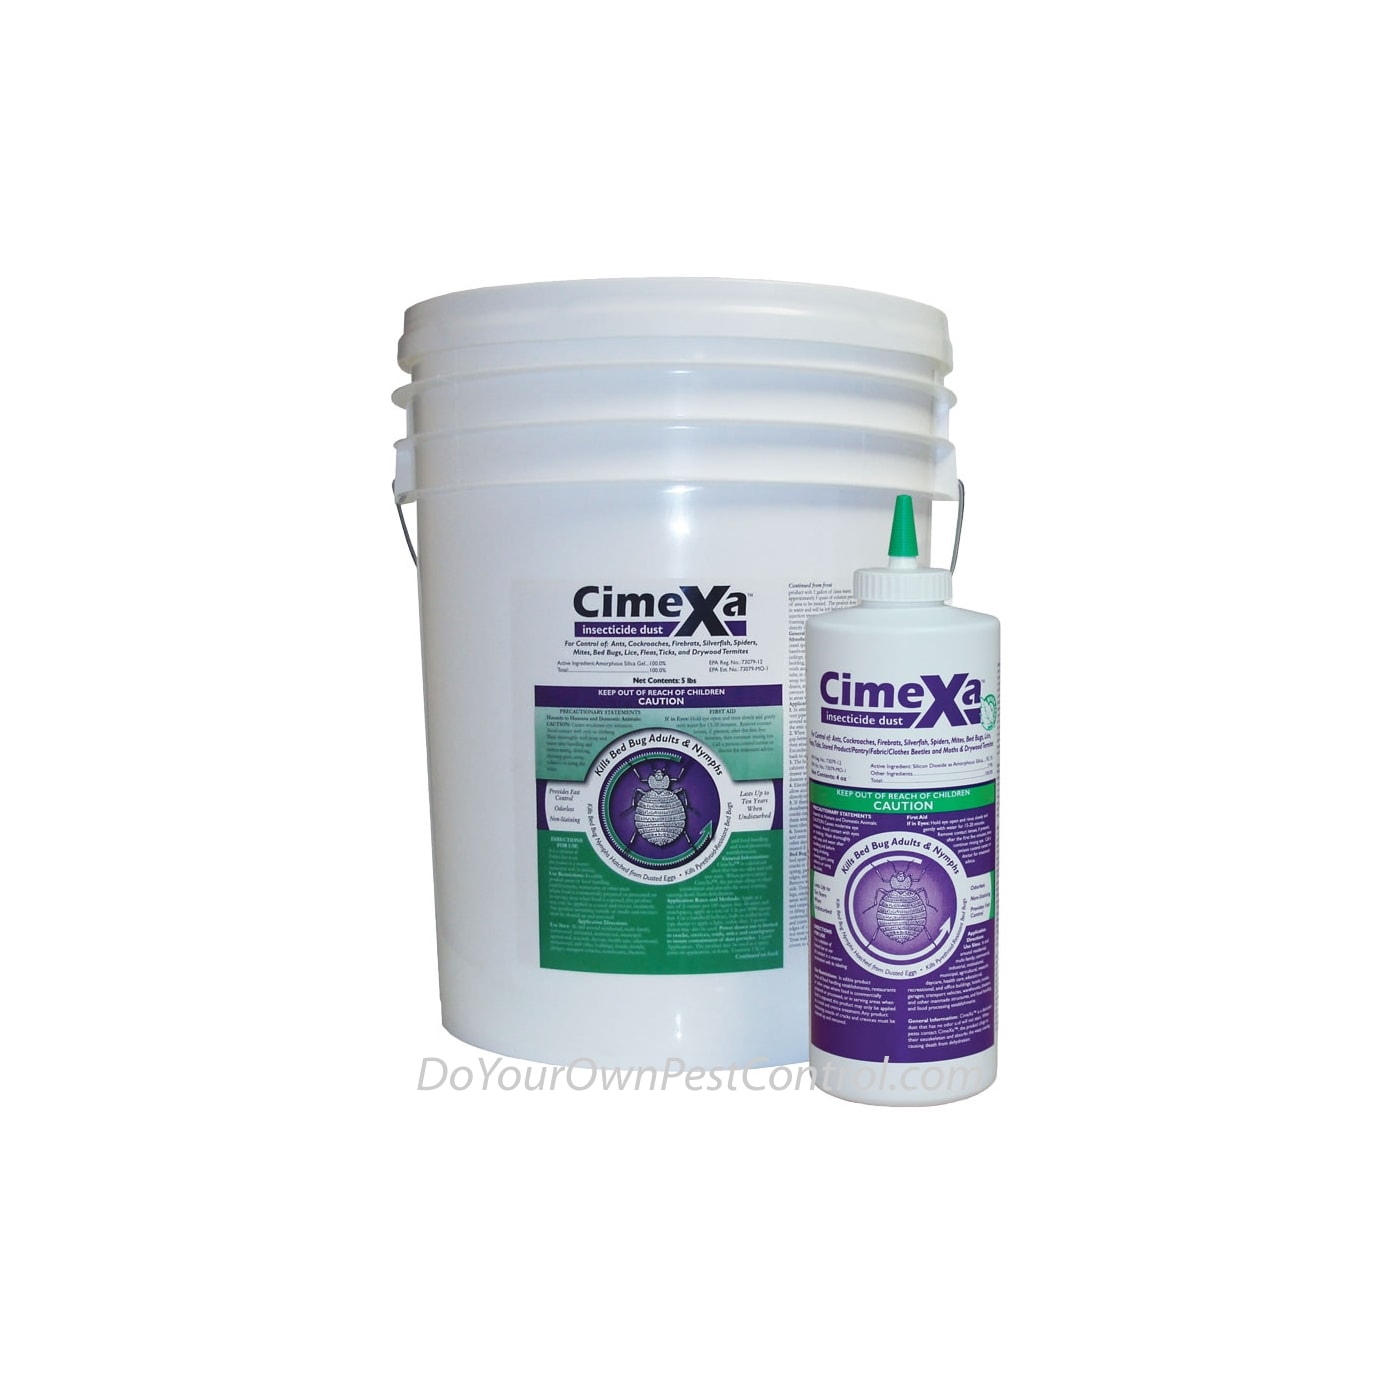 CimeXa Insecticide Dust- 4 oz and 5 lb